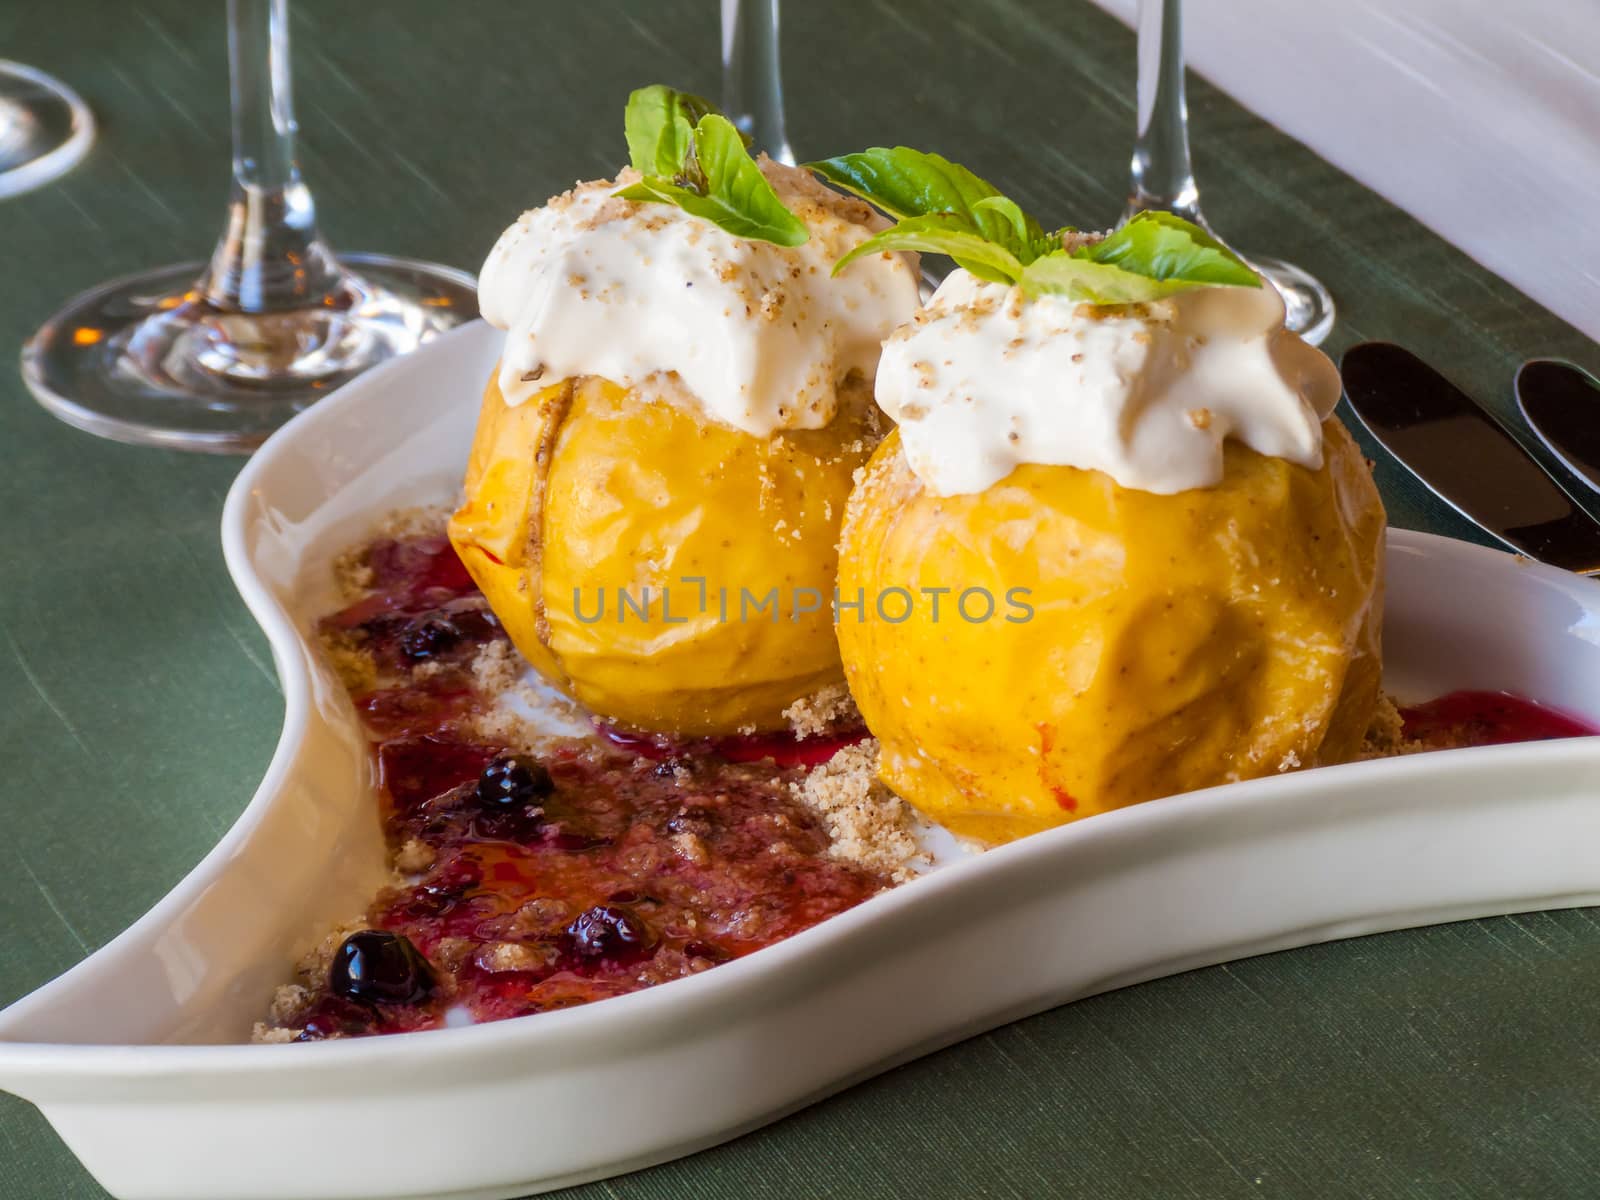 yellow and juicy baked apples with jam, decorated with sour cream and chopped nuts, and mint leaves in a triangular plate